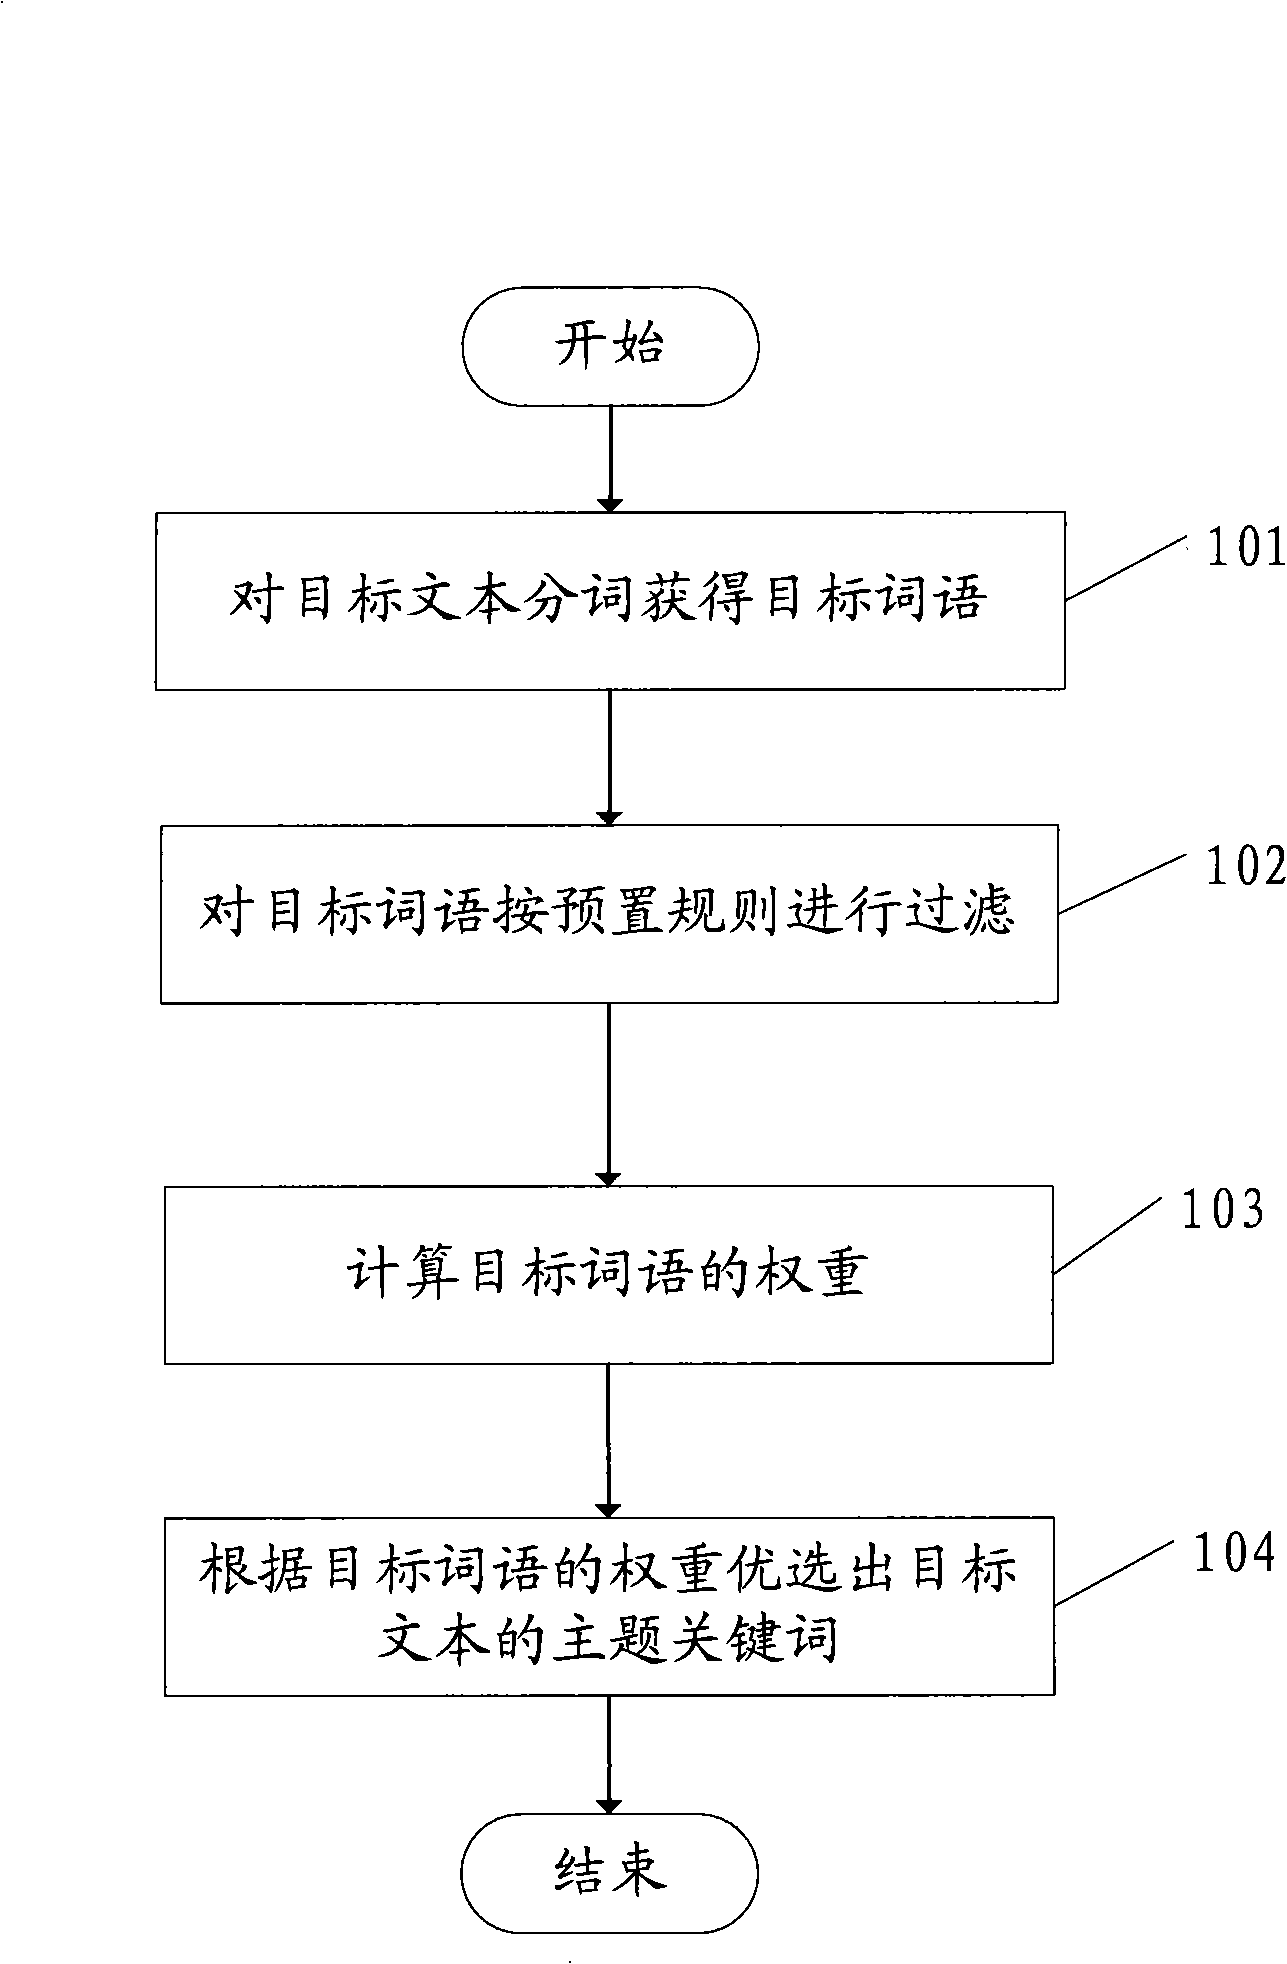 Text subject recommending method and device